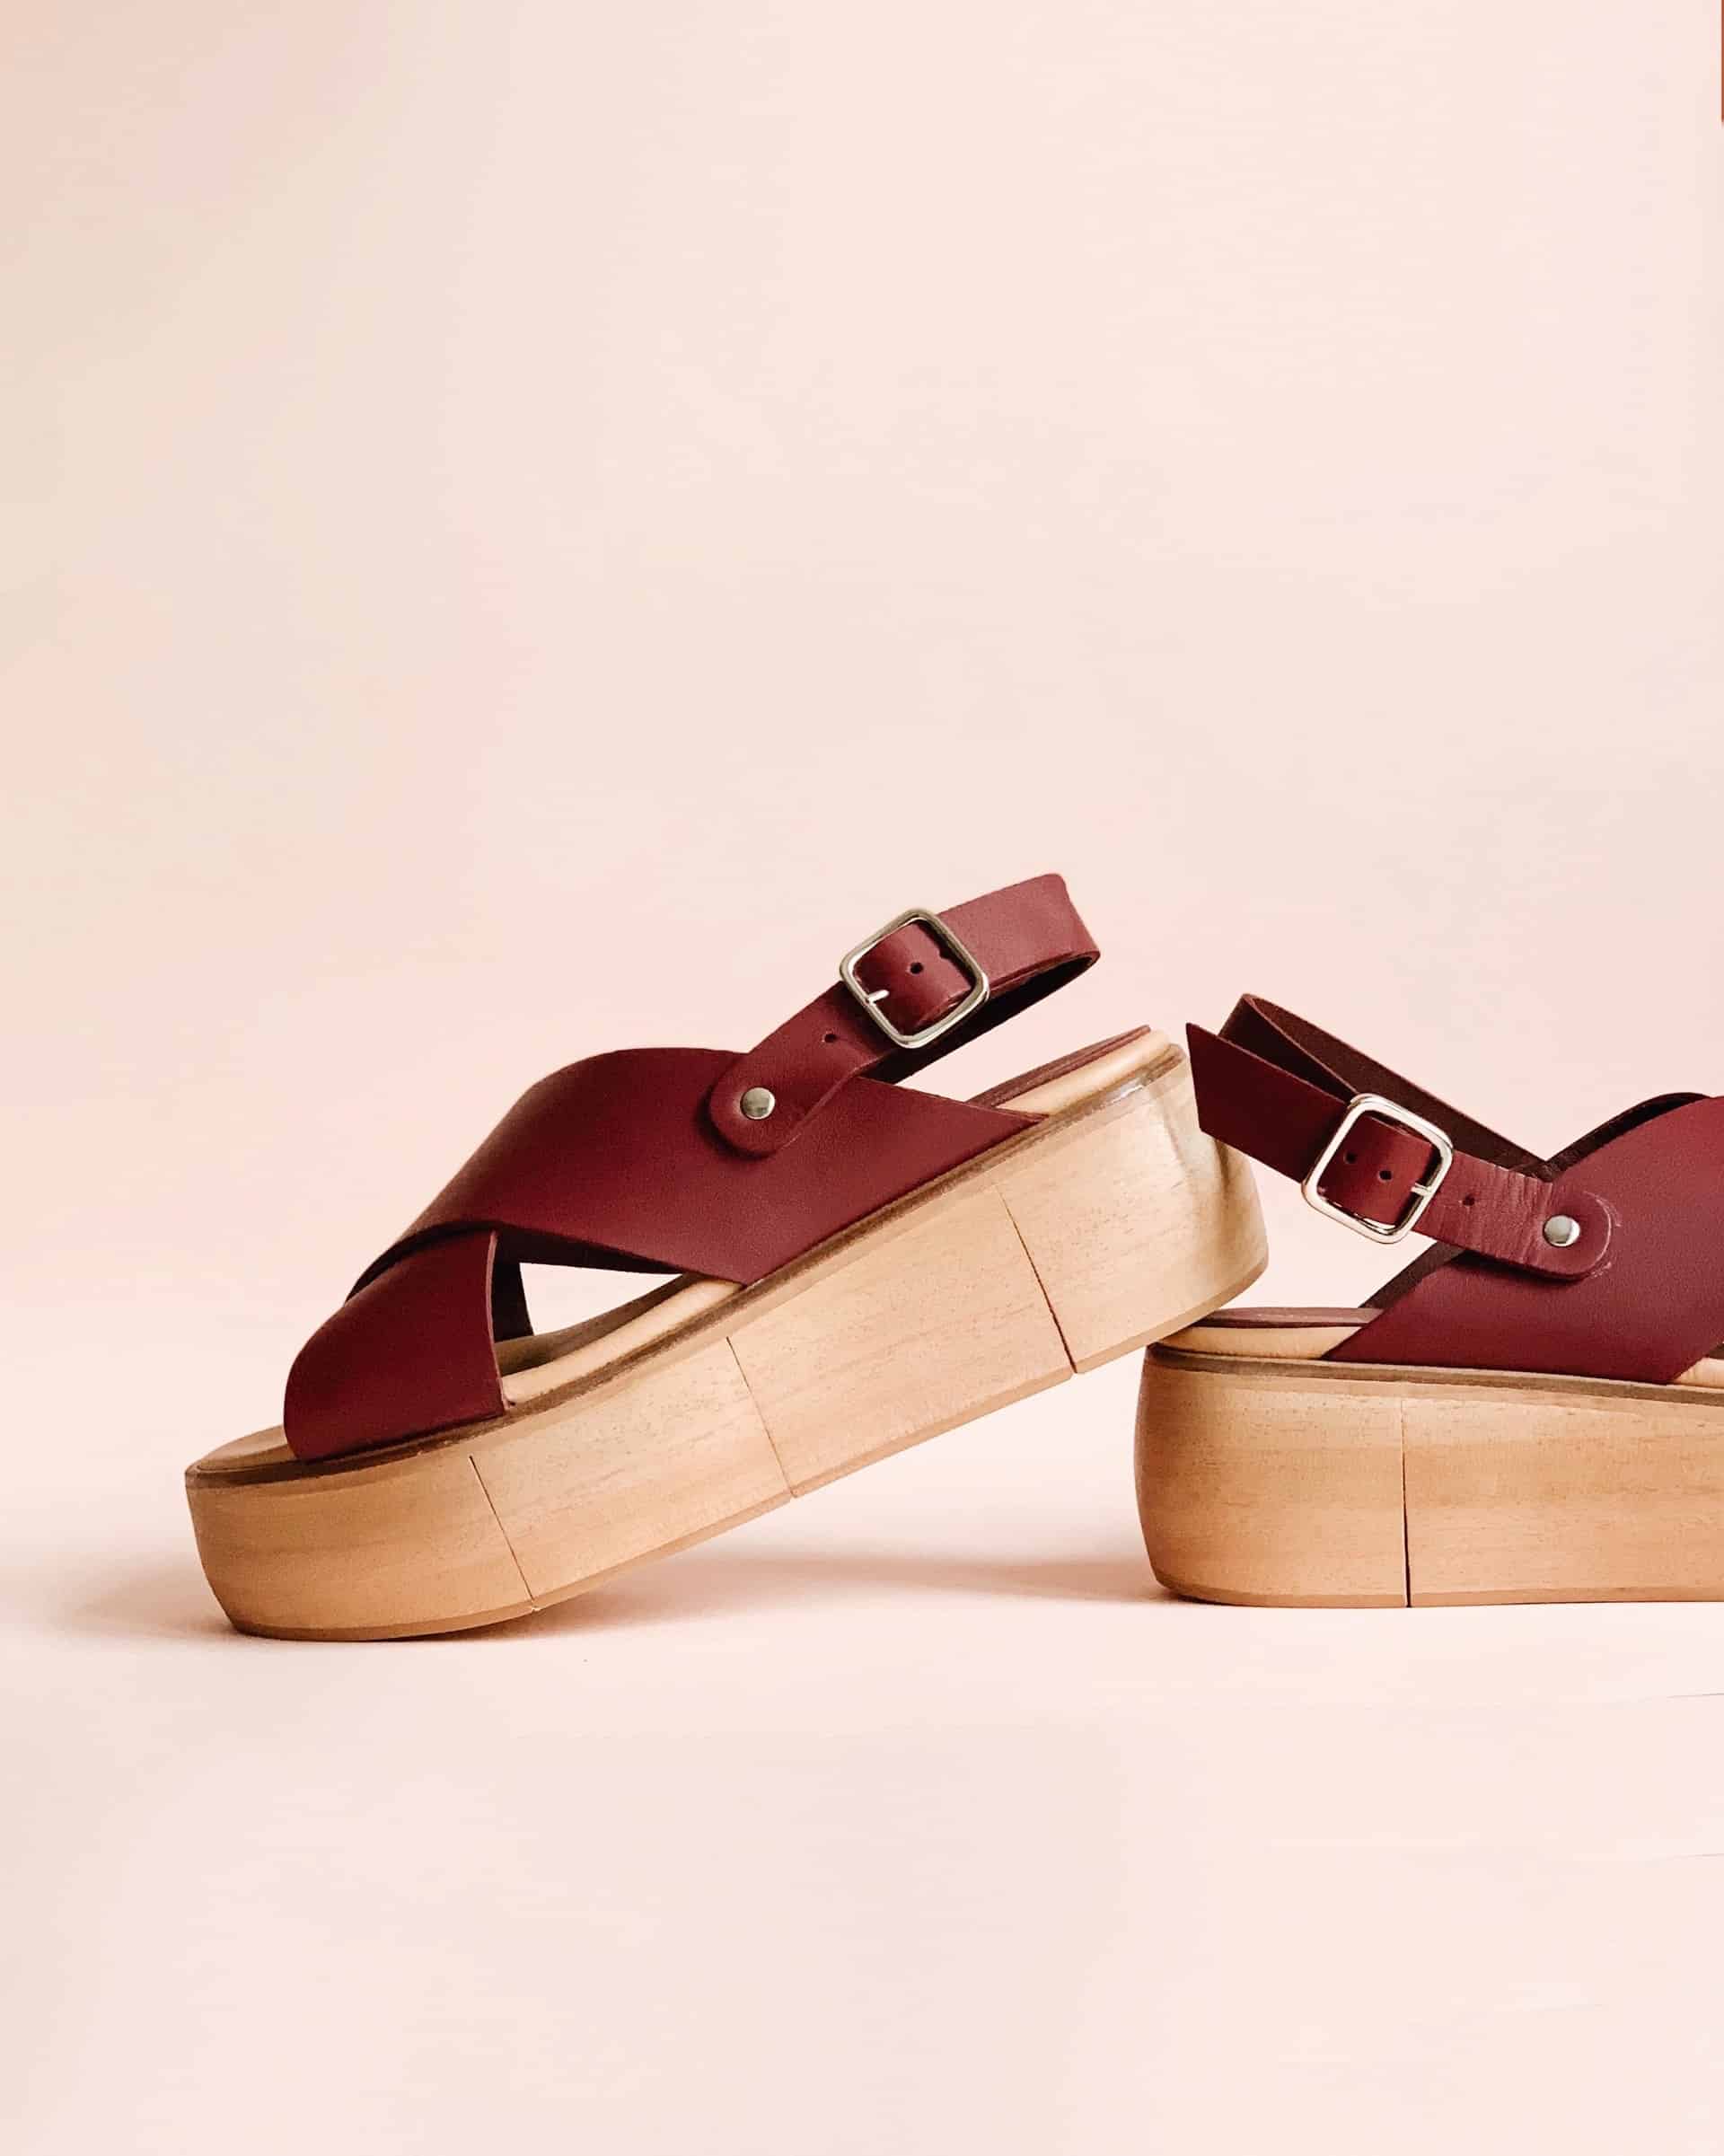 Platform sandals in fashion again – check how to style them